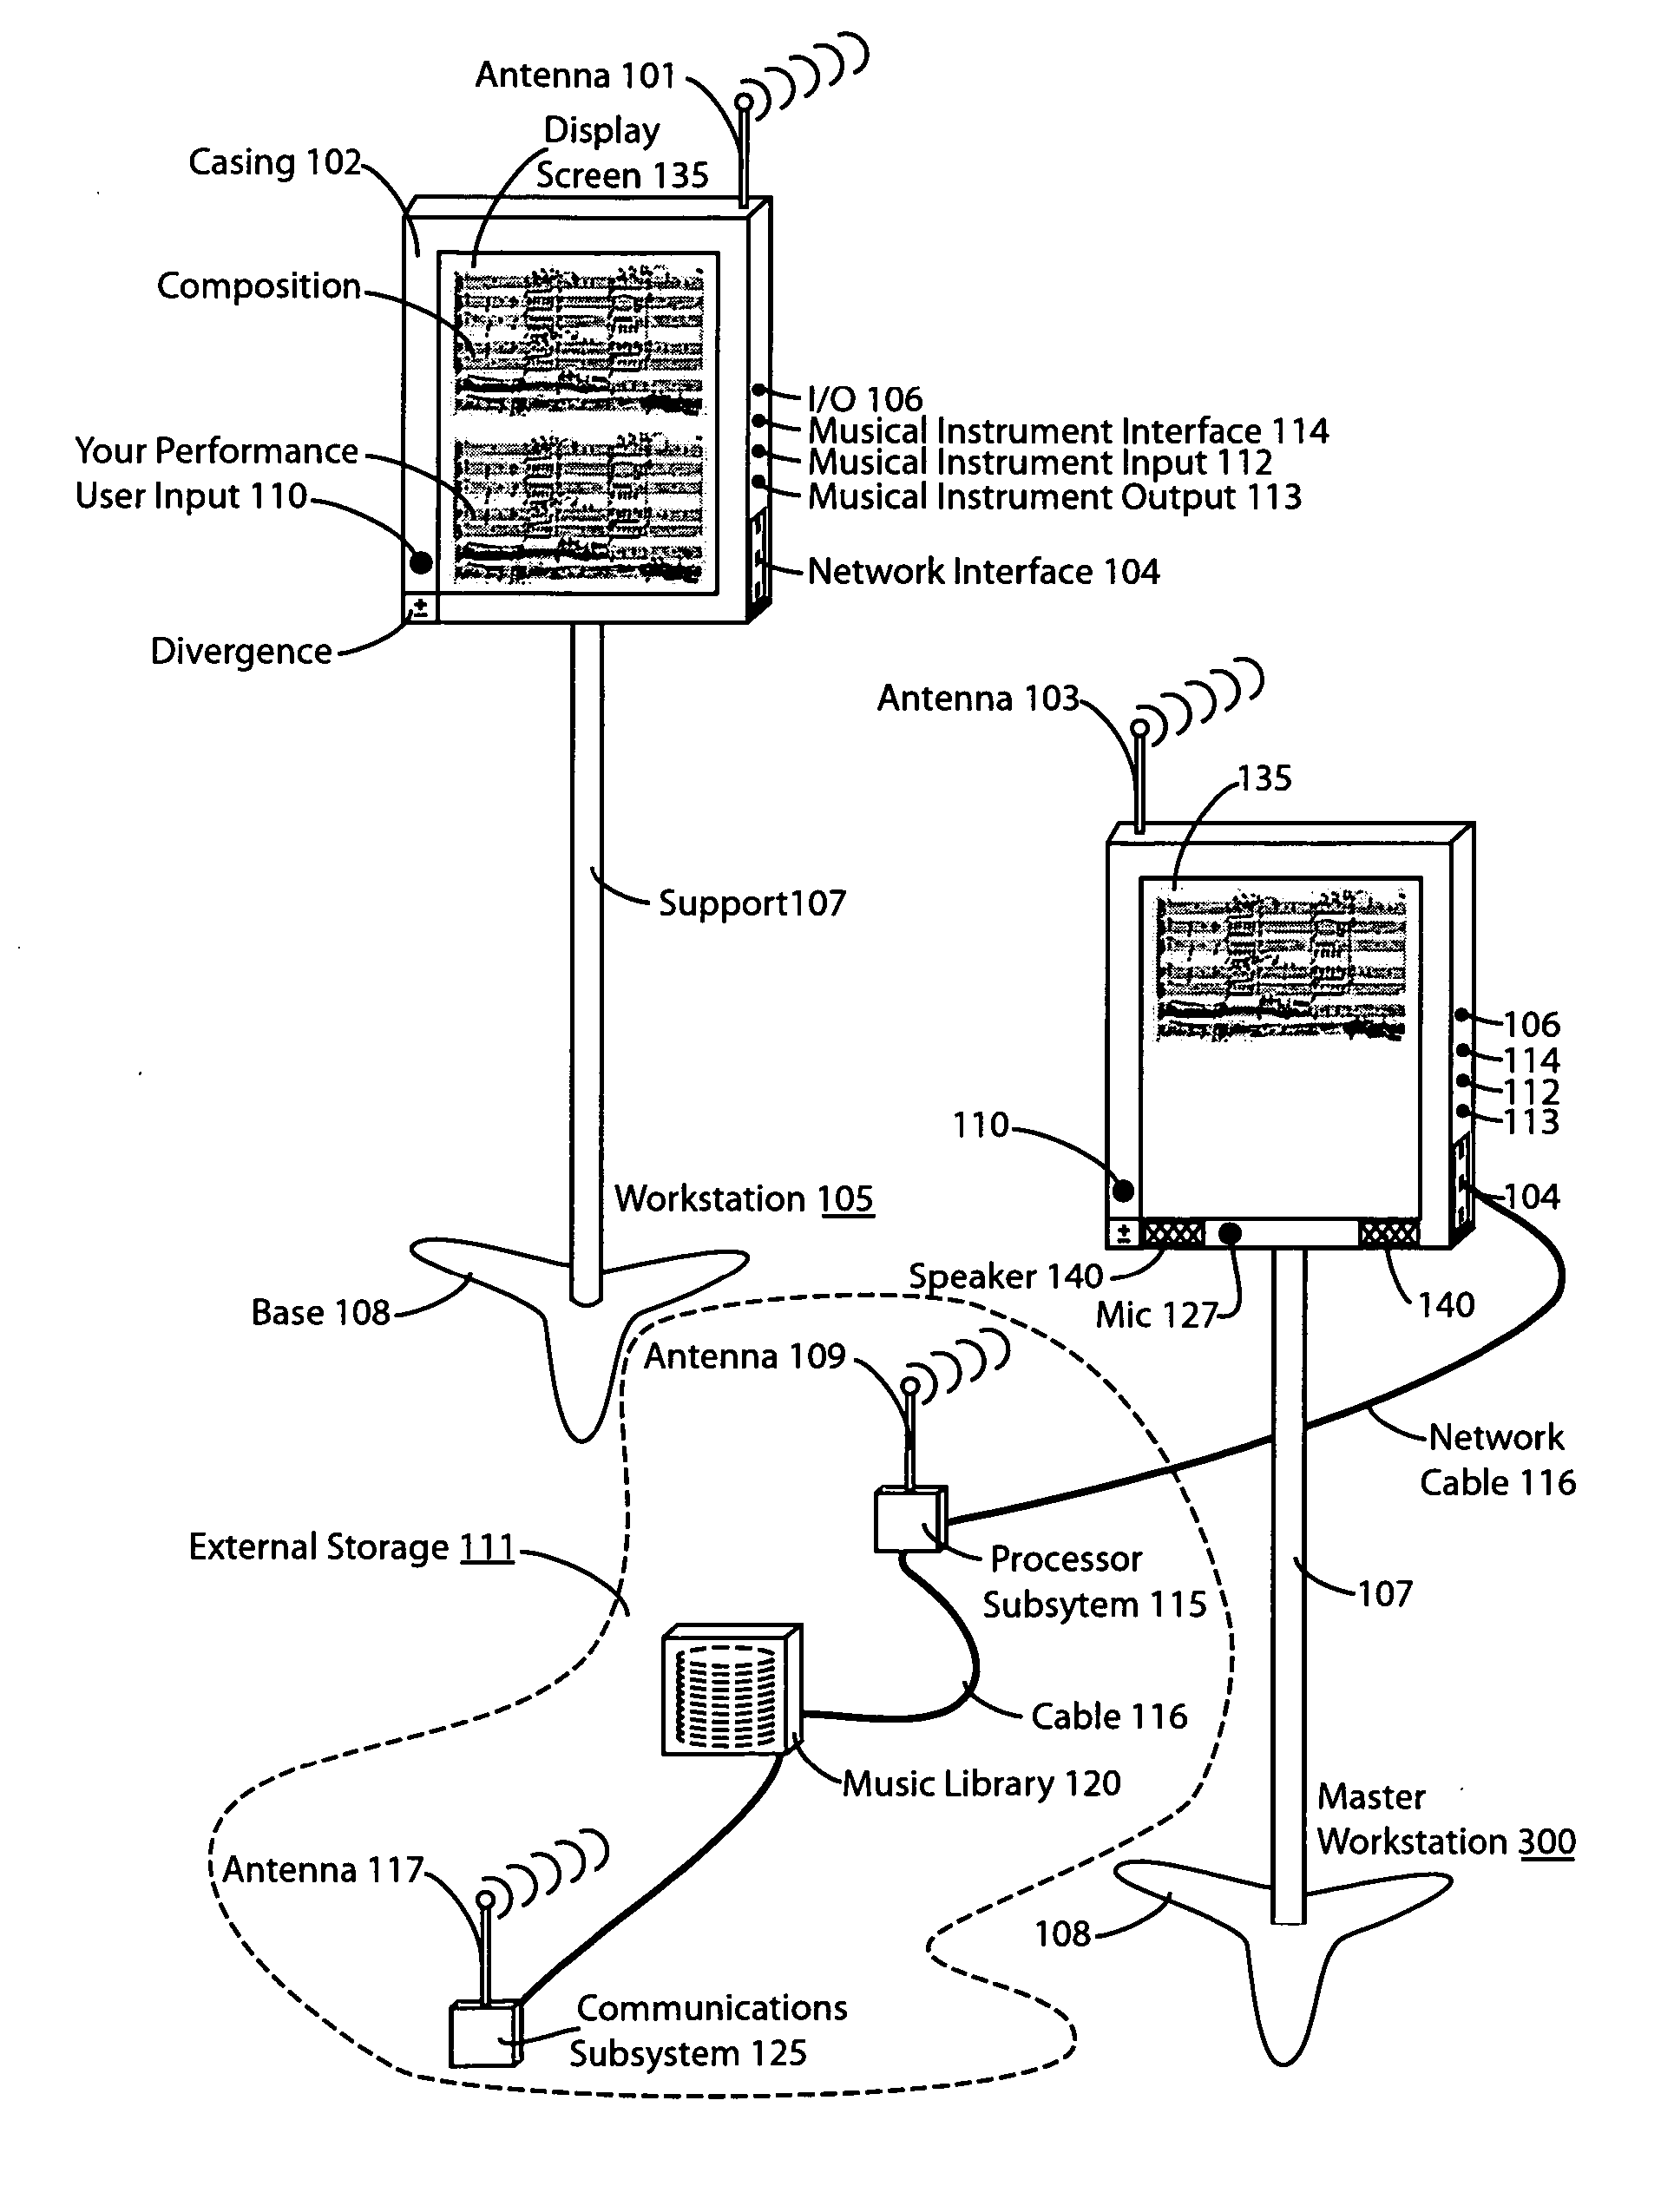 System and methodology for image and overlaid annotation display, management and communicaiton